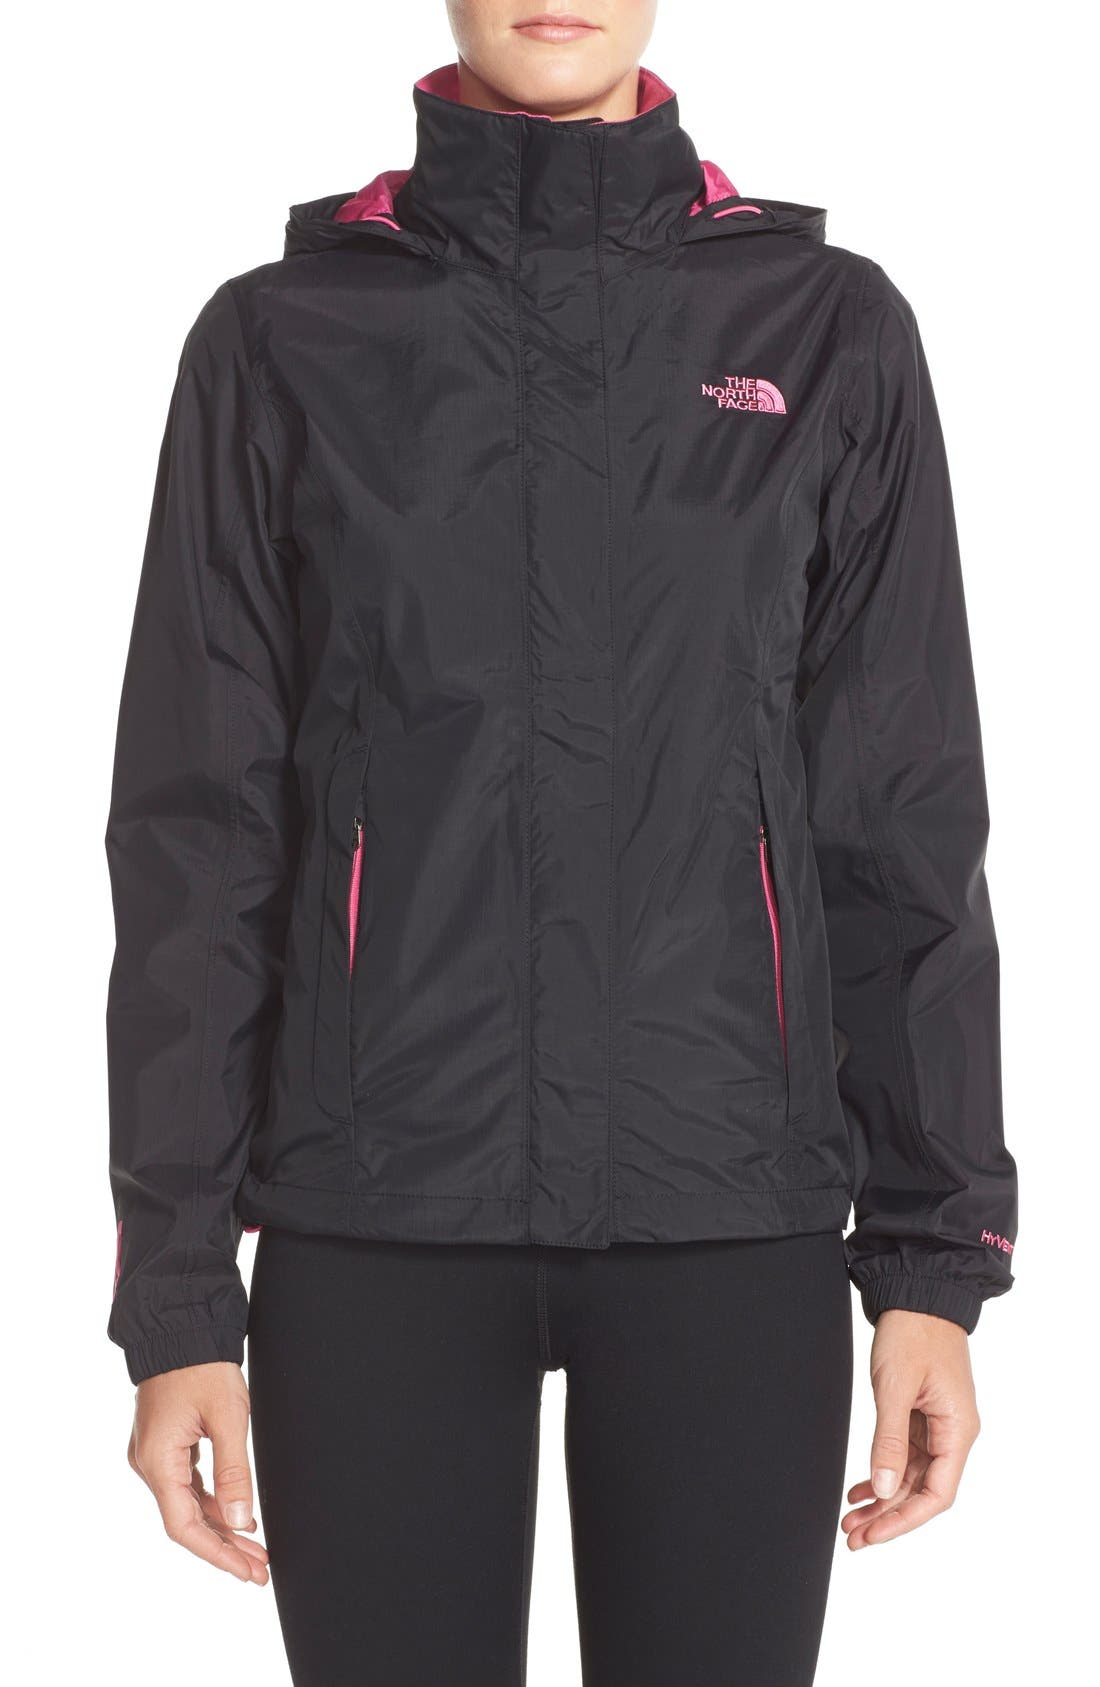 The North Face 'Pink Ribbon Resolve 